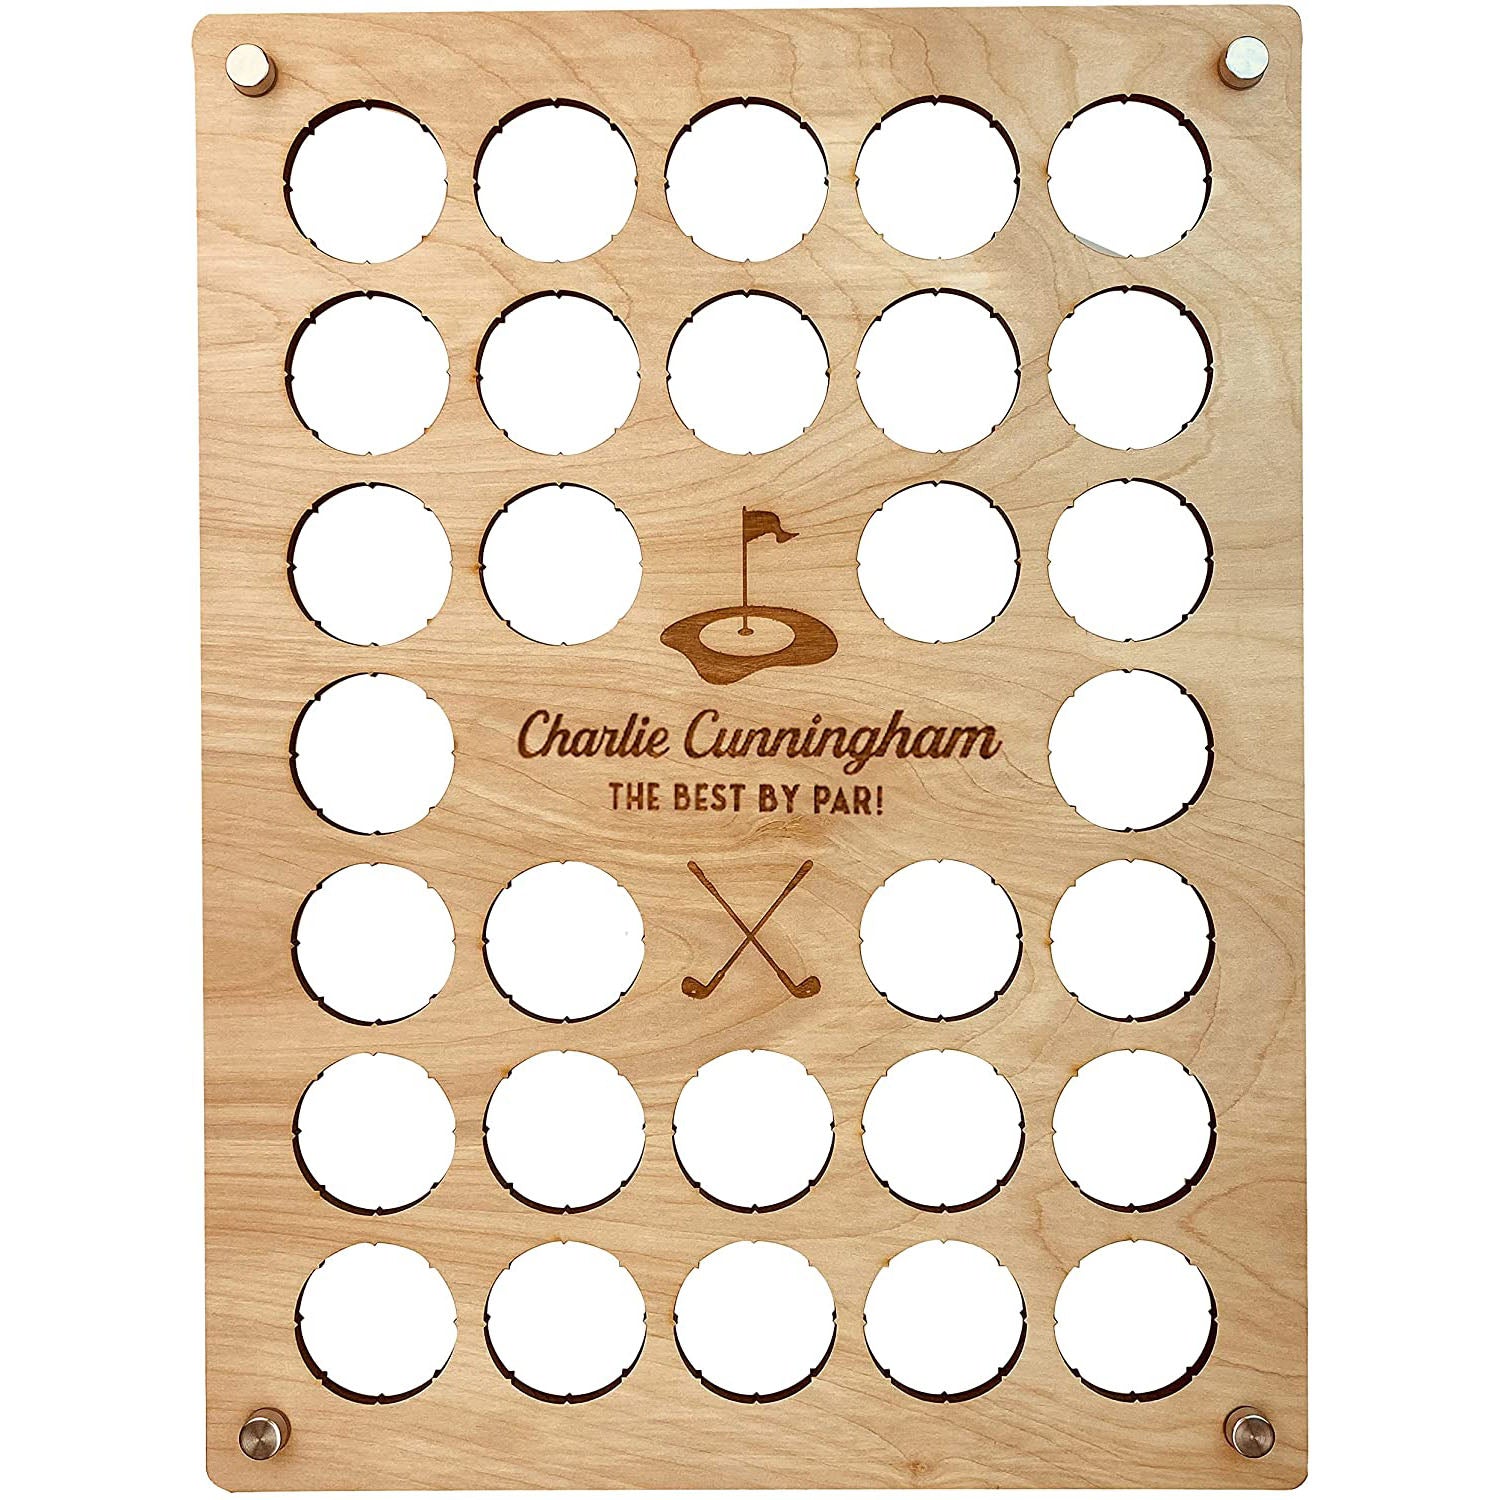 Torched Products mws_apo_generated Default Title #MWS Options 1852743879 Personalized Golf Ball Display Holder- Holds 30 Golf Balls